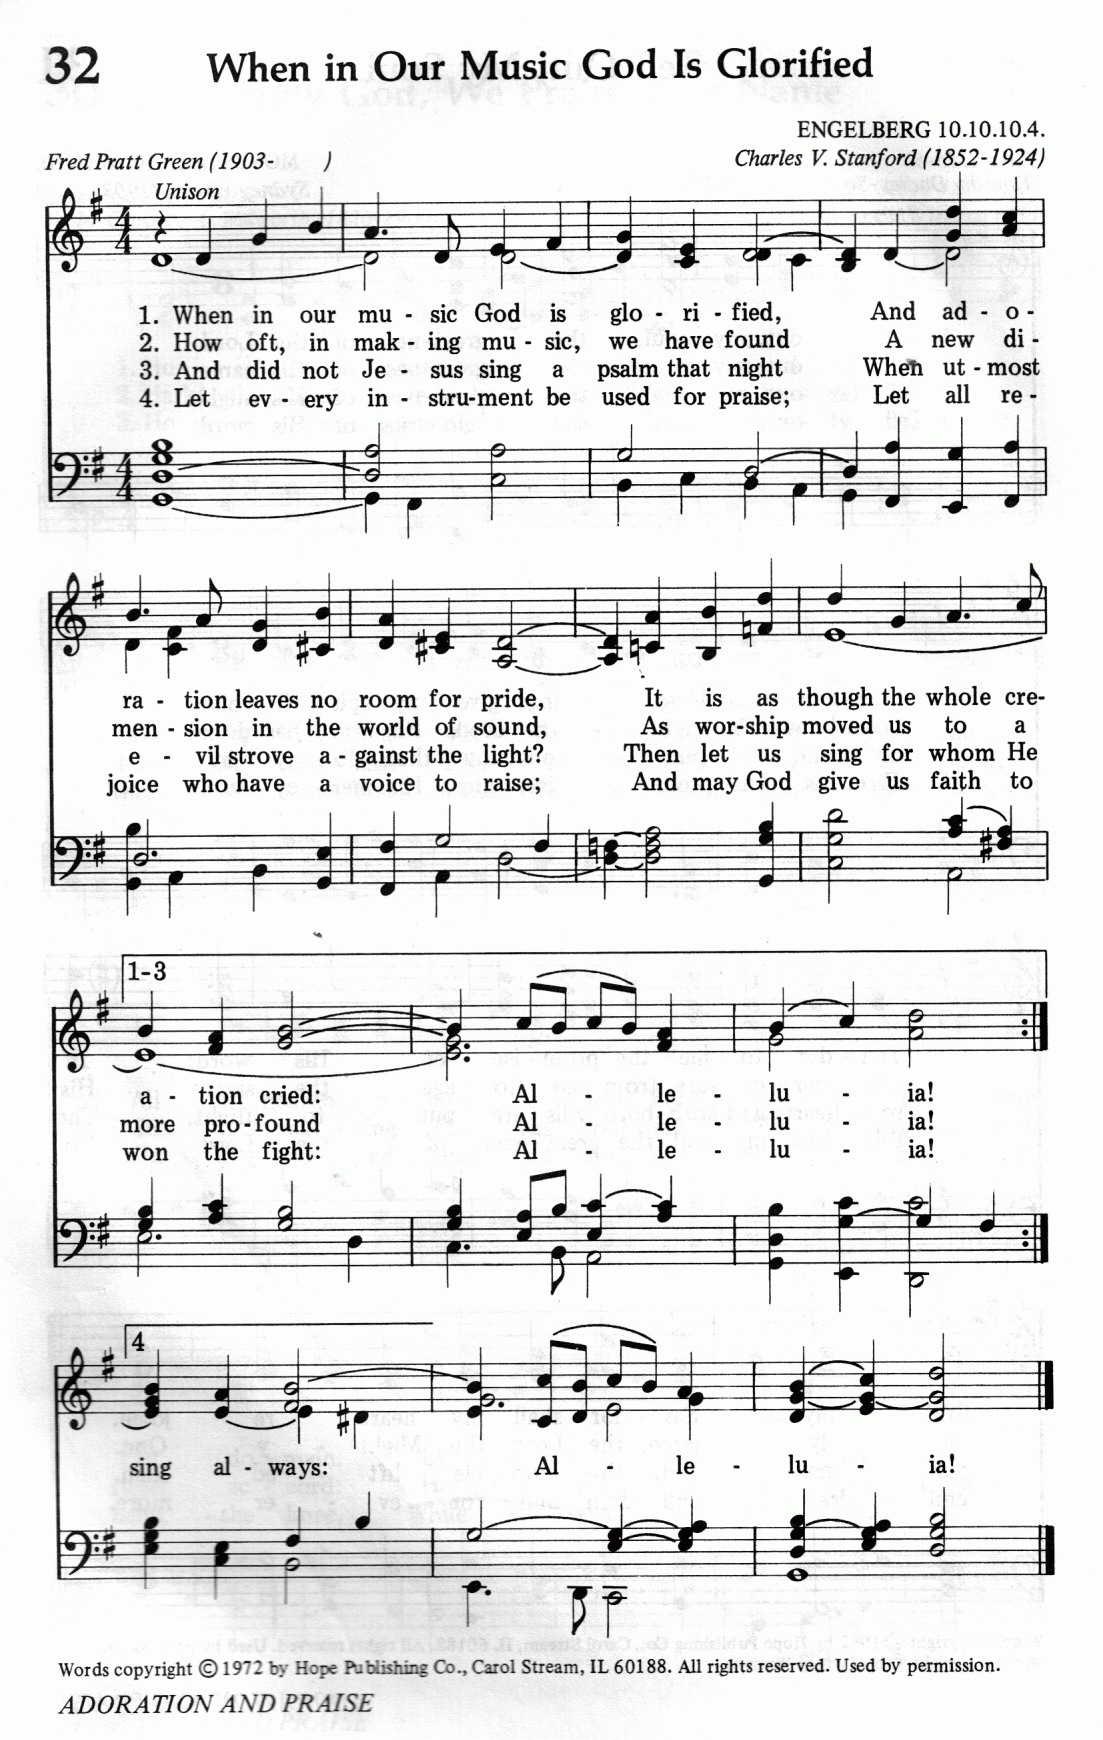 032.When in Our Music God is Glorified-695HYMN